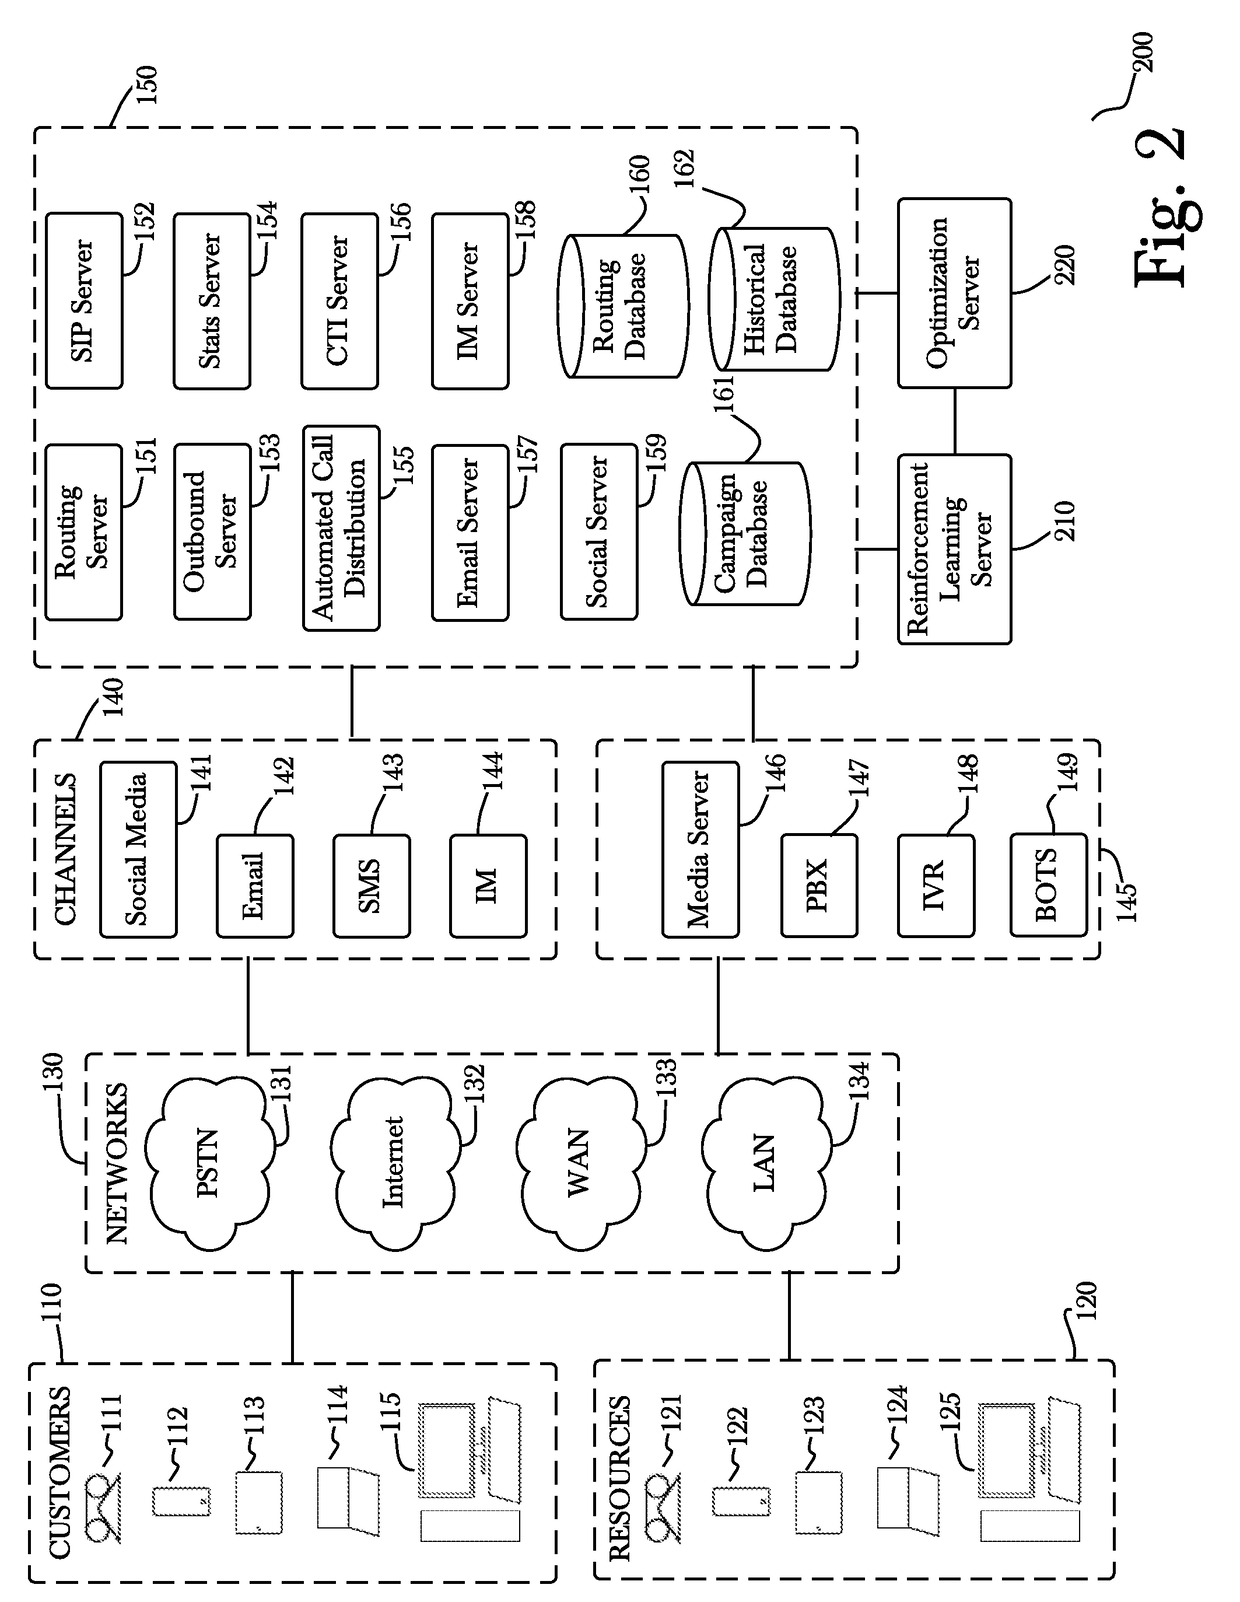 System and method for optimizing communications using reinforcement learning